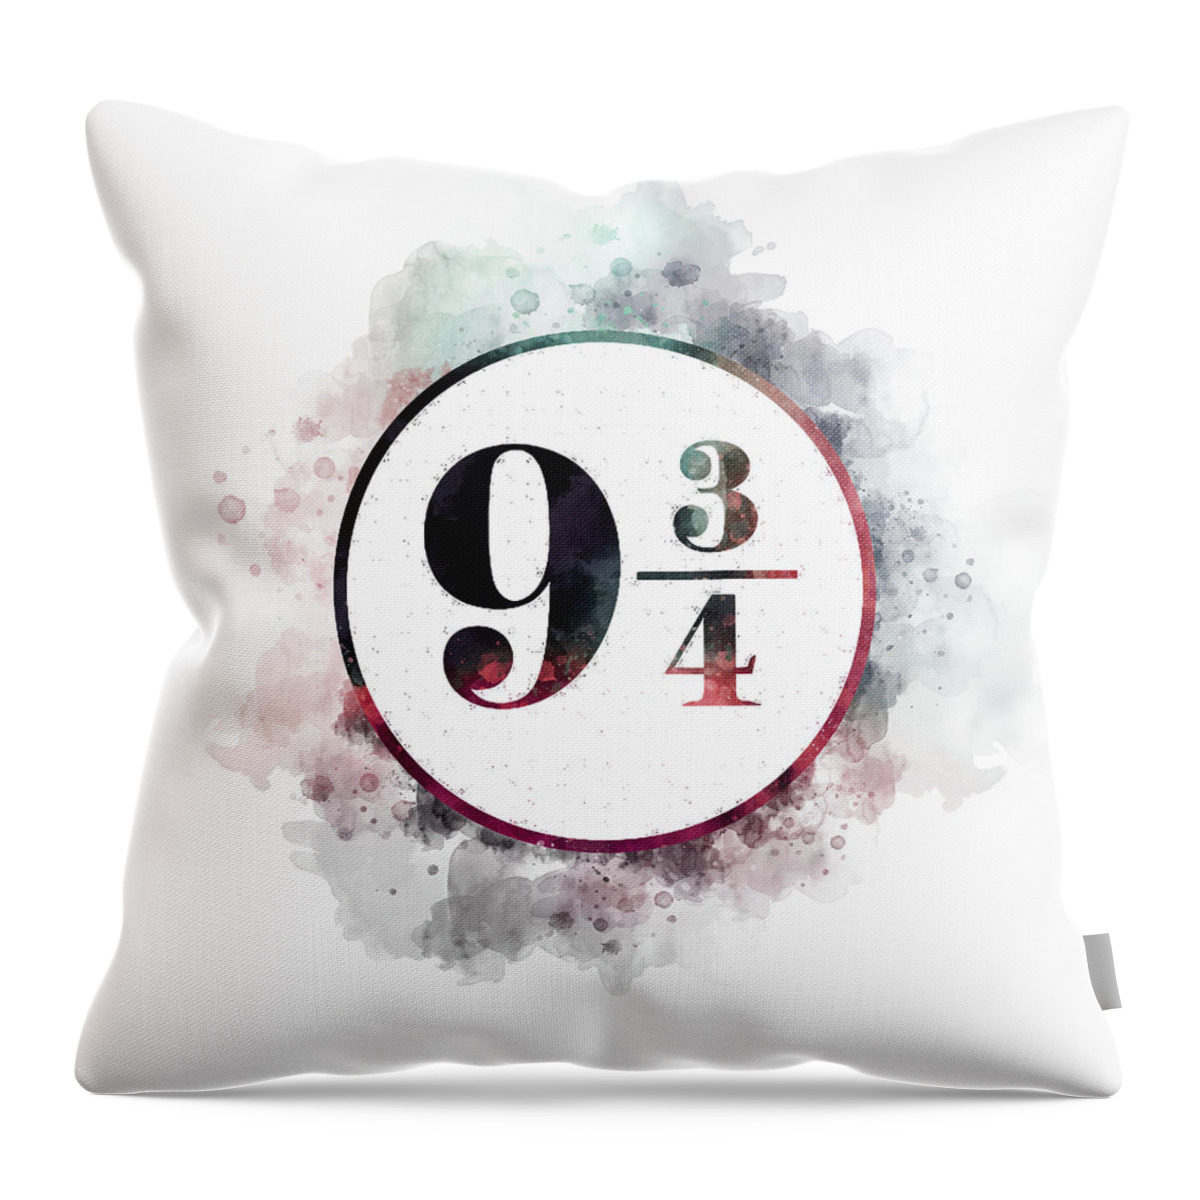 Harry Potter Throw Pillow featuring the digital art Harry Potter King's Cross Station Platform 9-3/4 Watercolor II by Ink Well